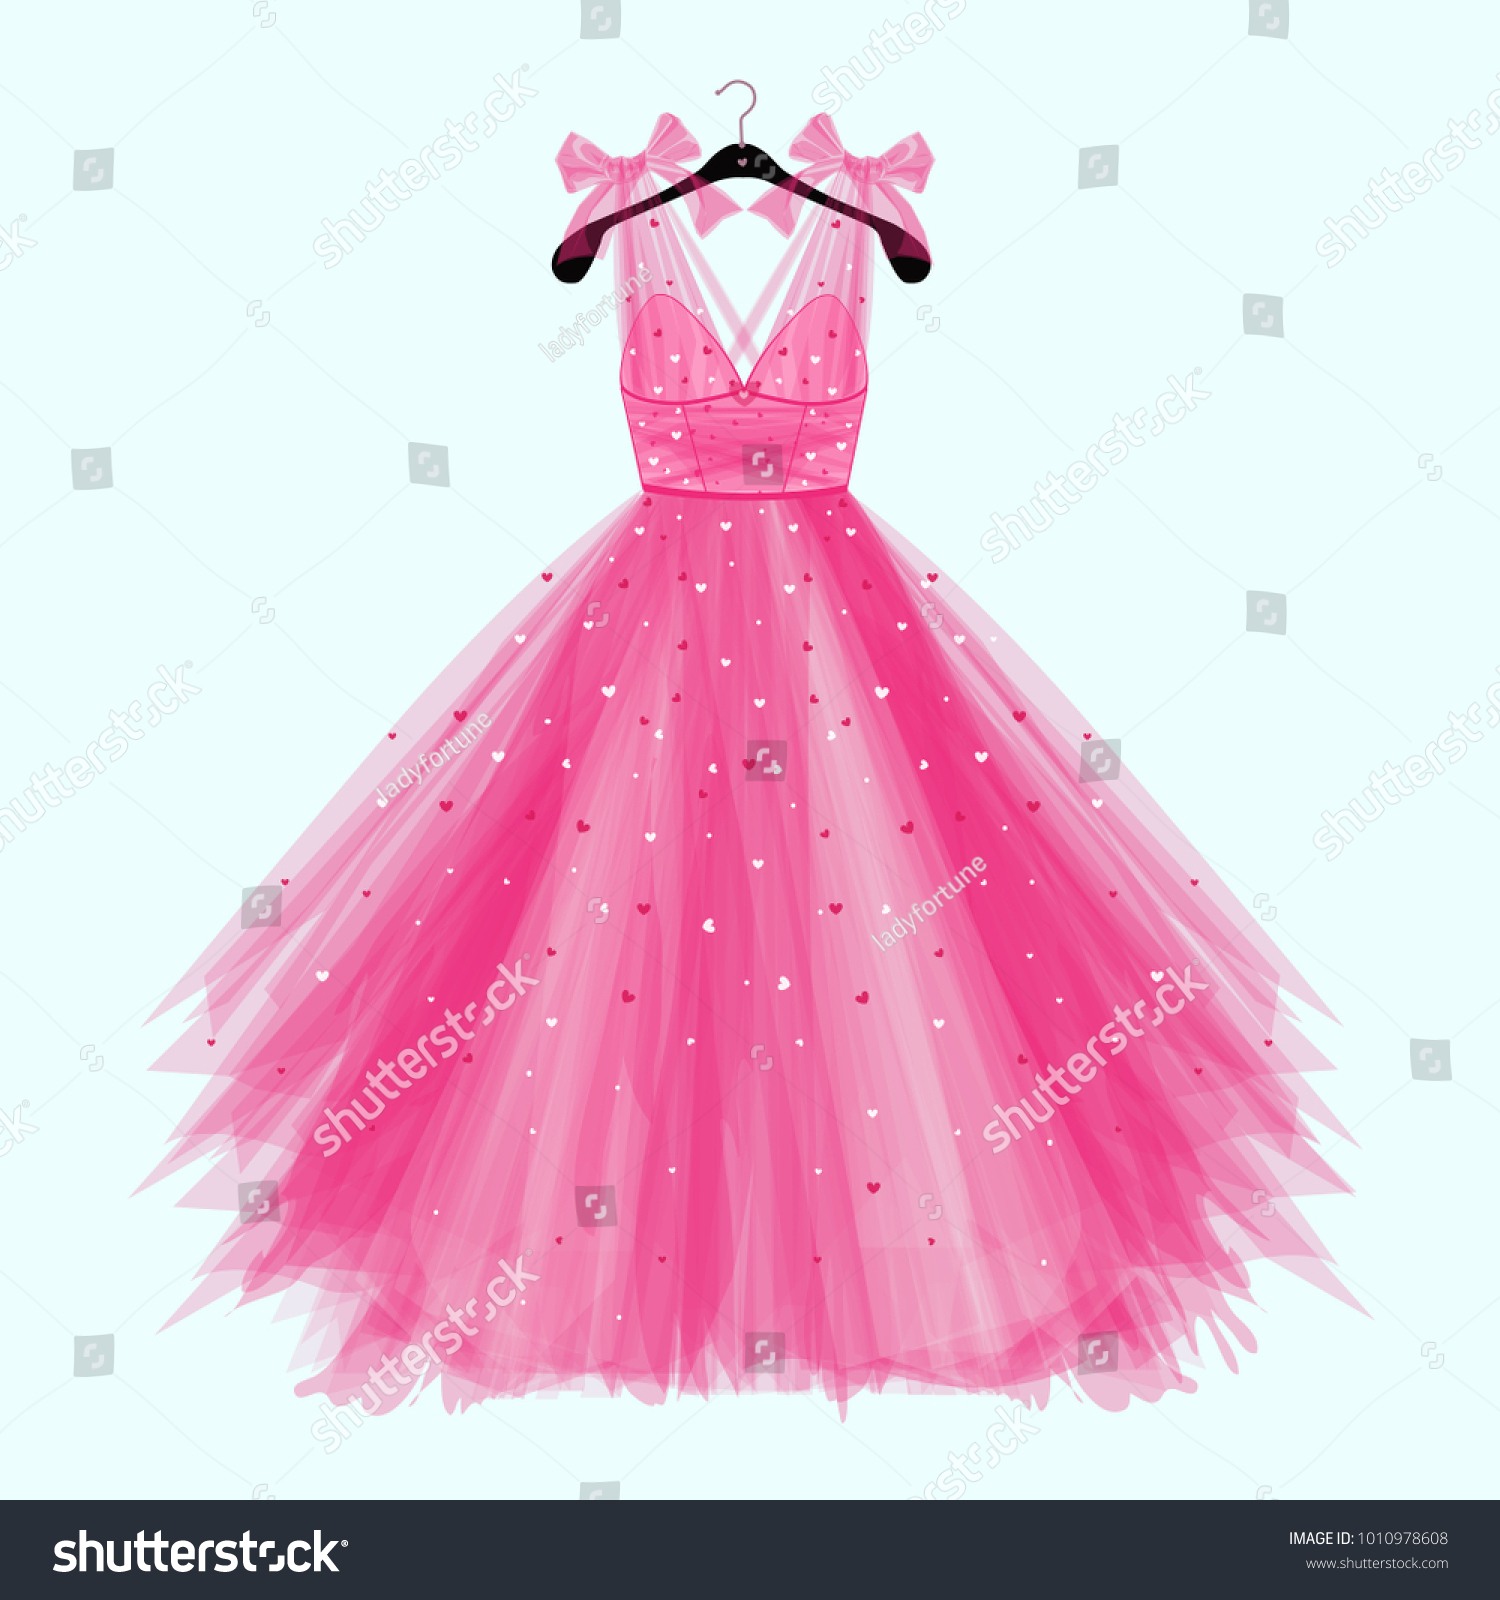 SVG of Pink birthday  party dress with bow. Fashion illustration for invitation card svg